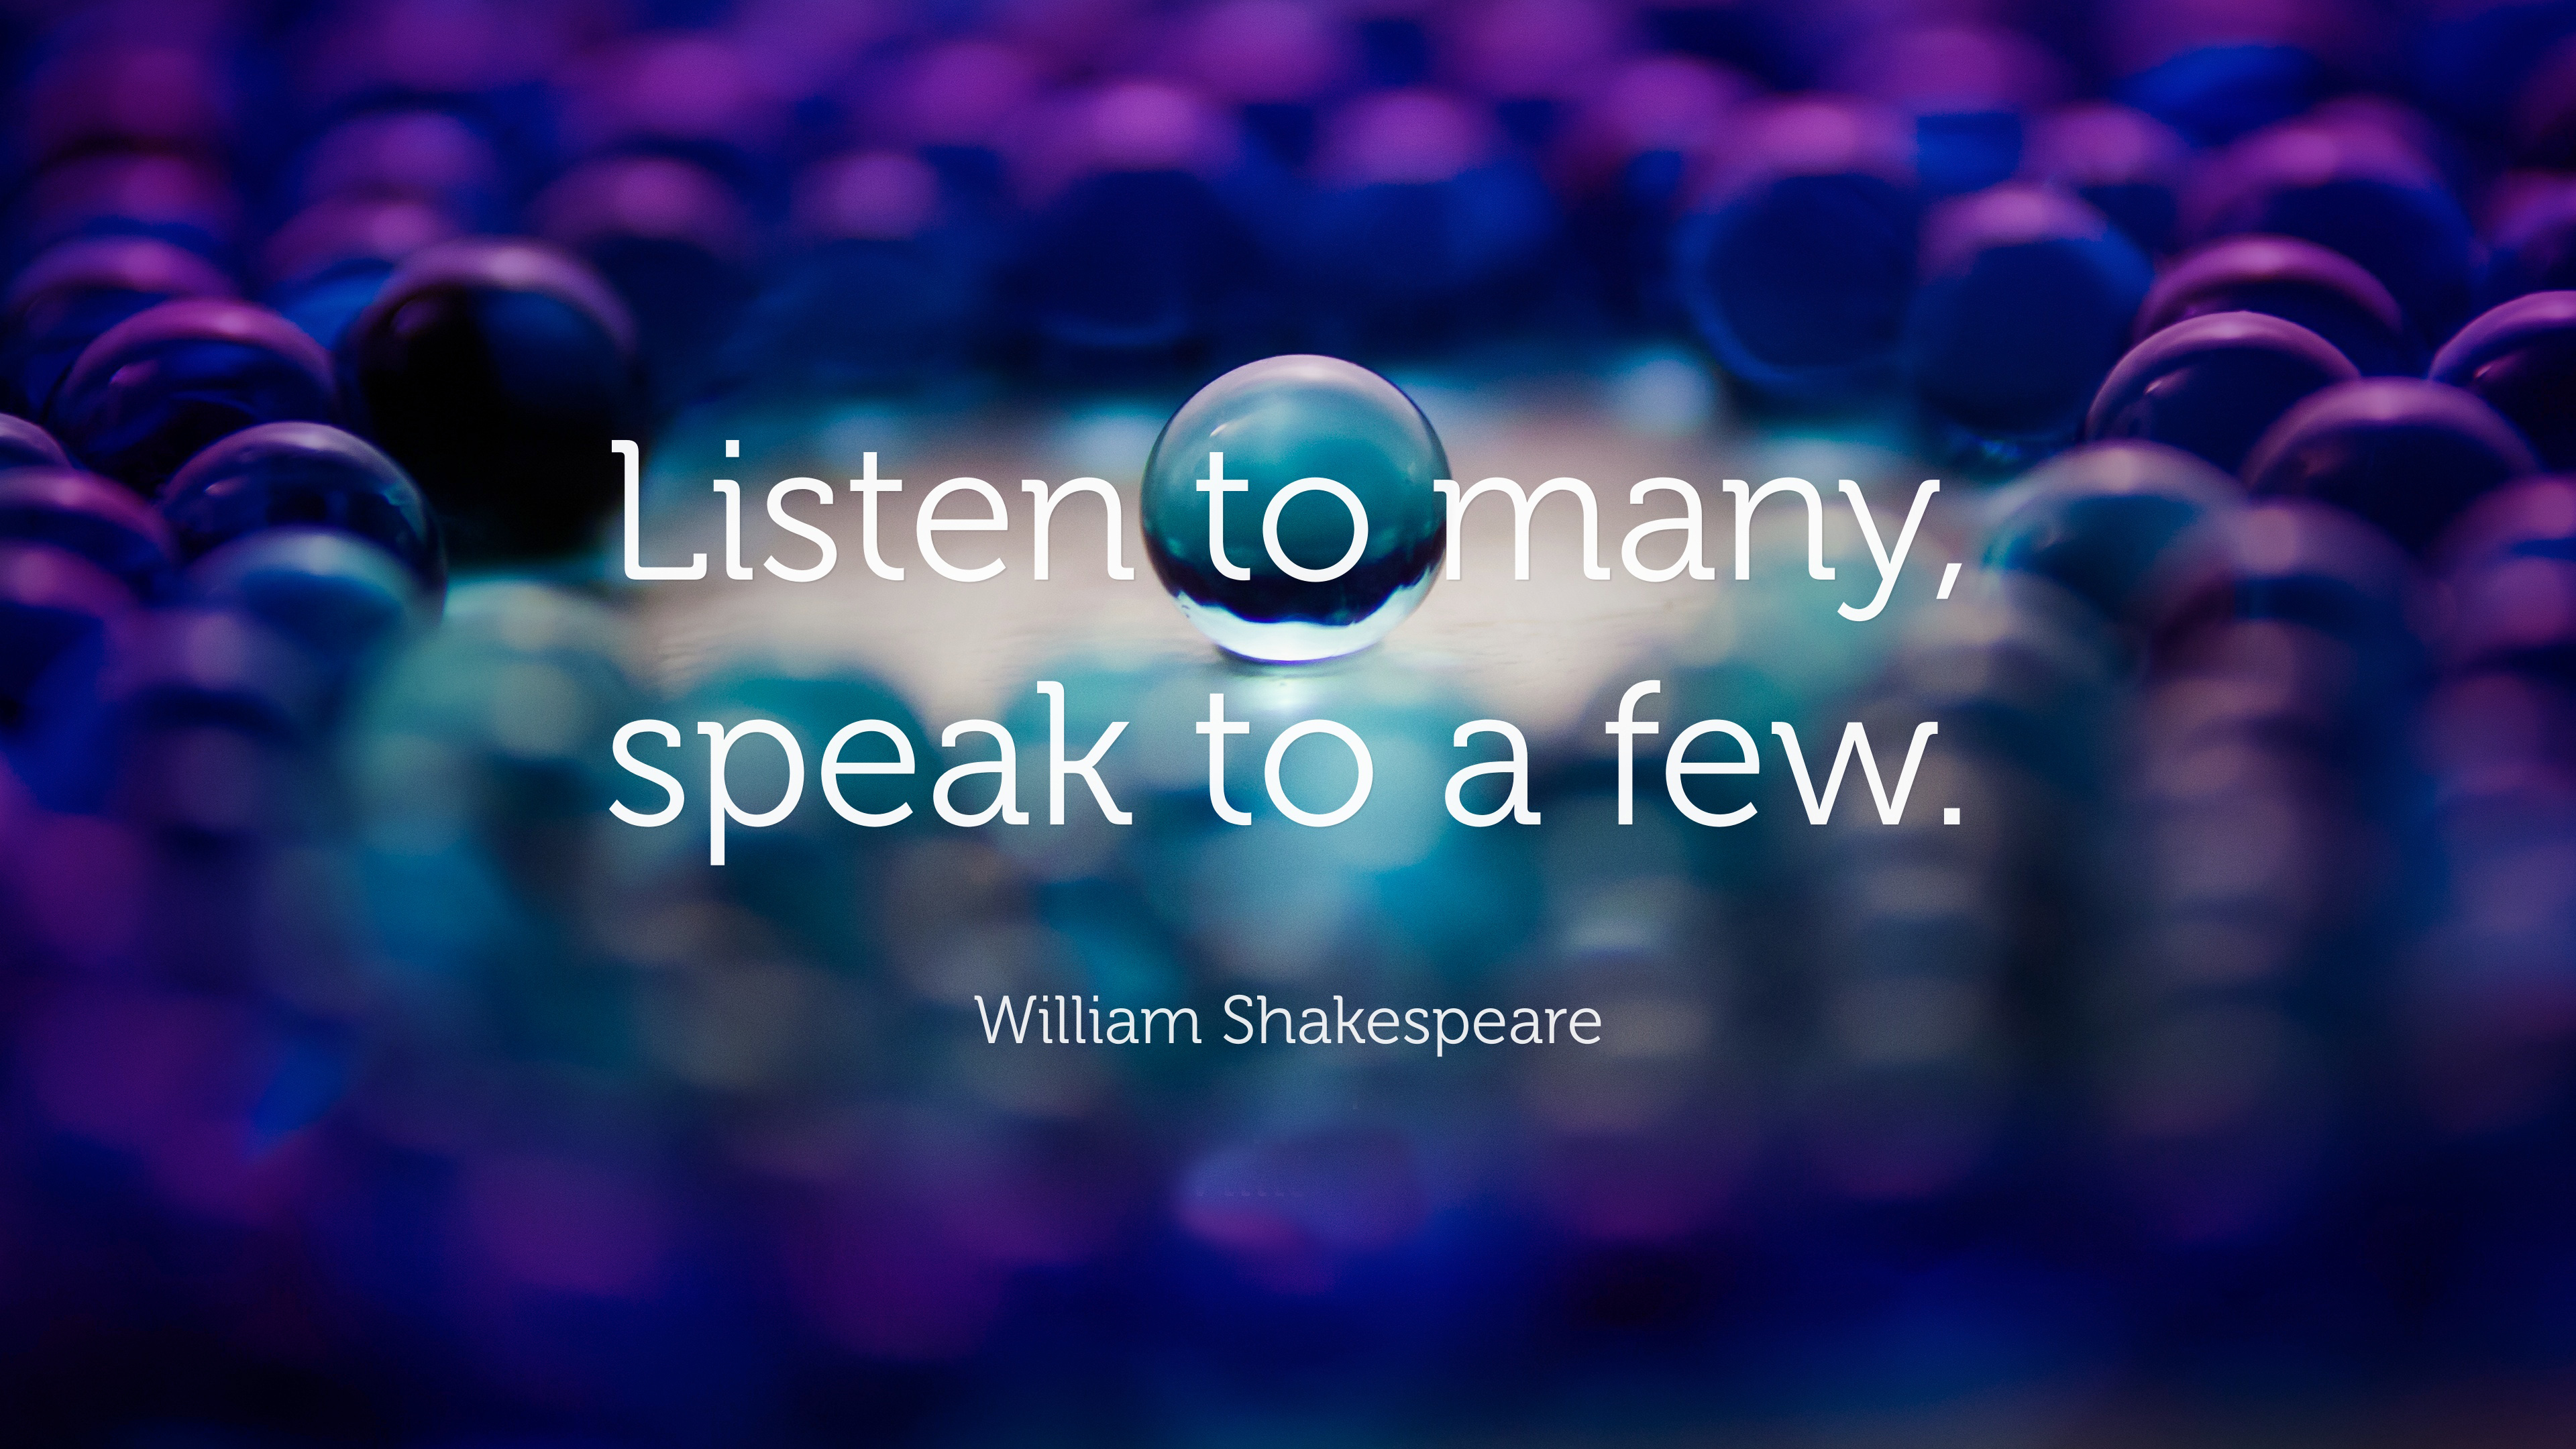 Quotes by William Shakespeare image